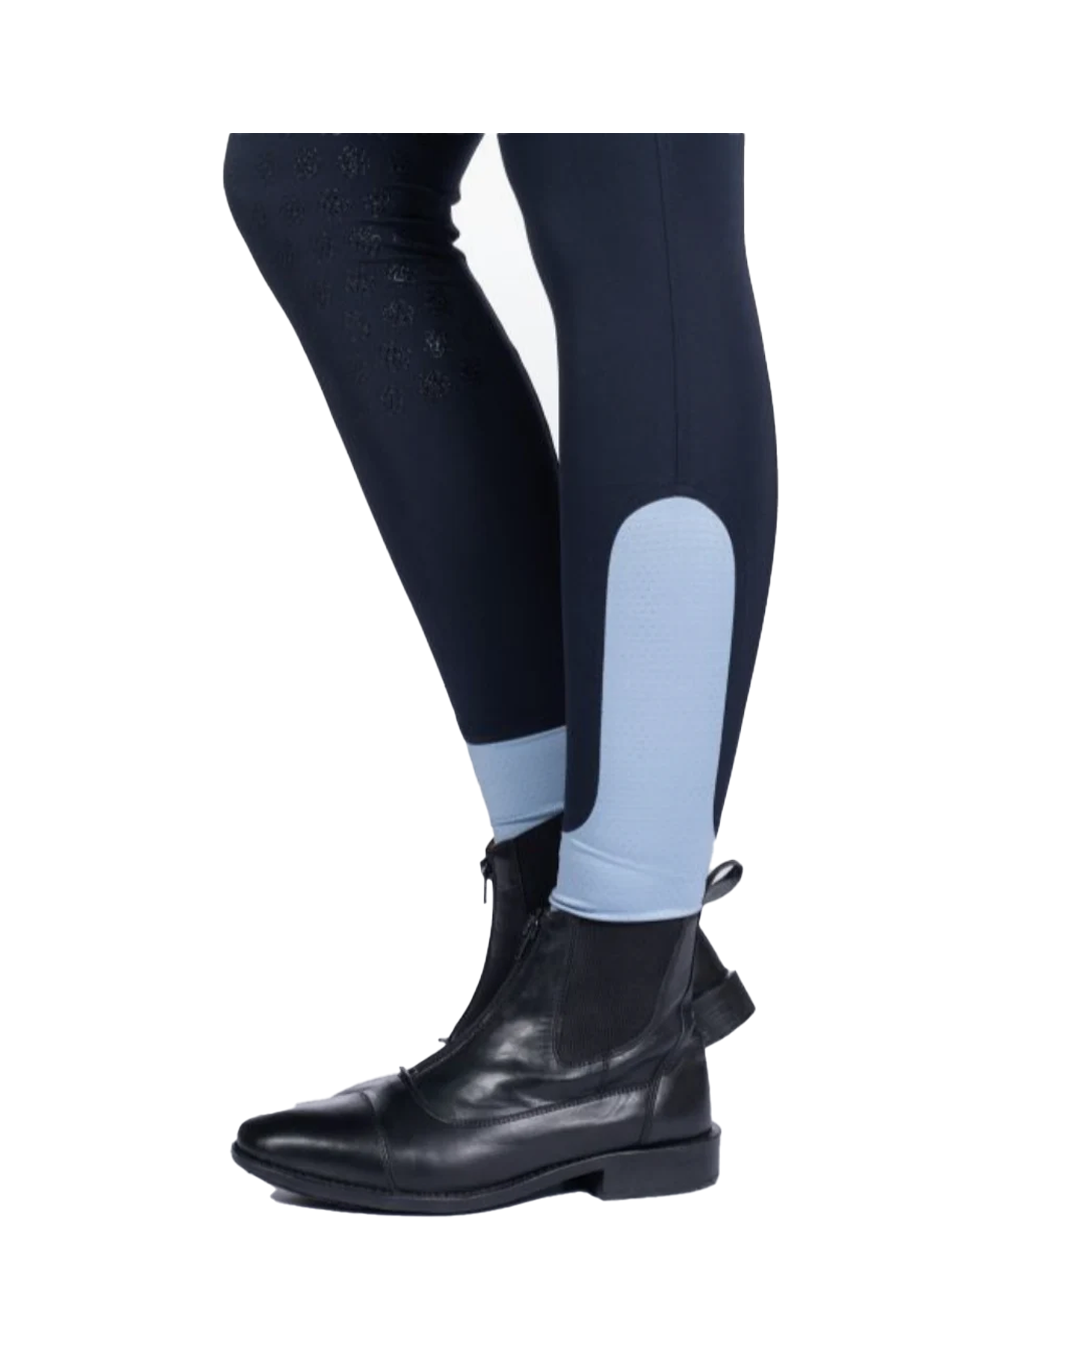 HKM Bloomsbury Breeches Breeches HKM - Equestrian Fashion Outfitters